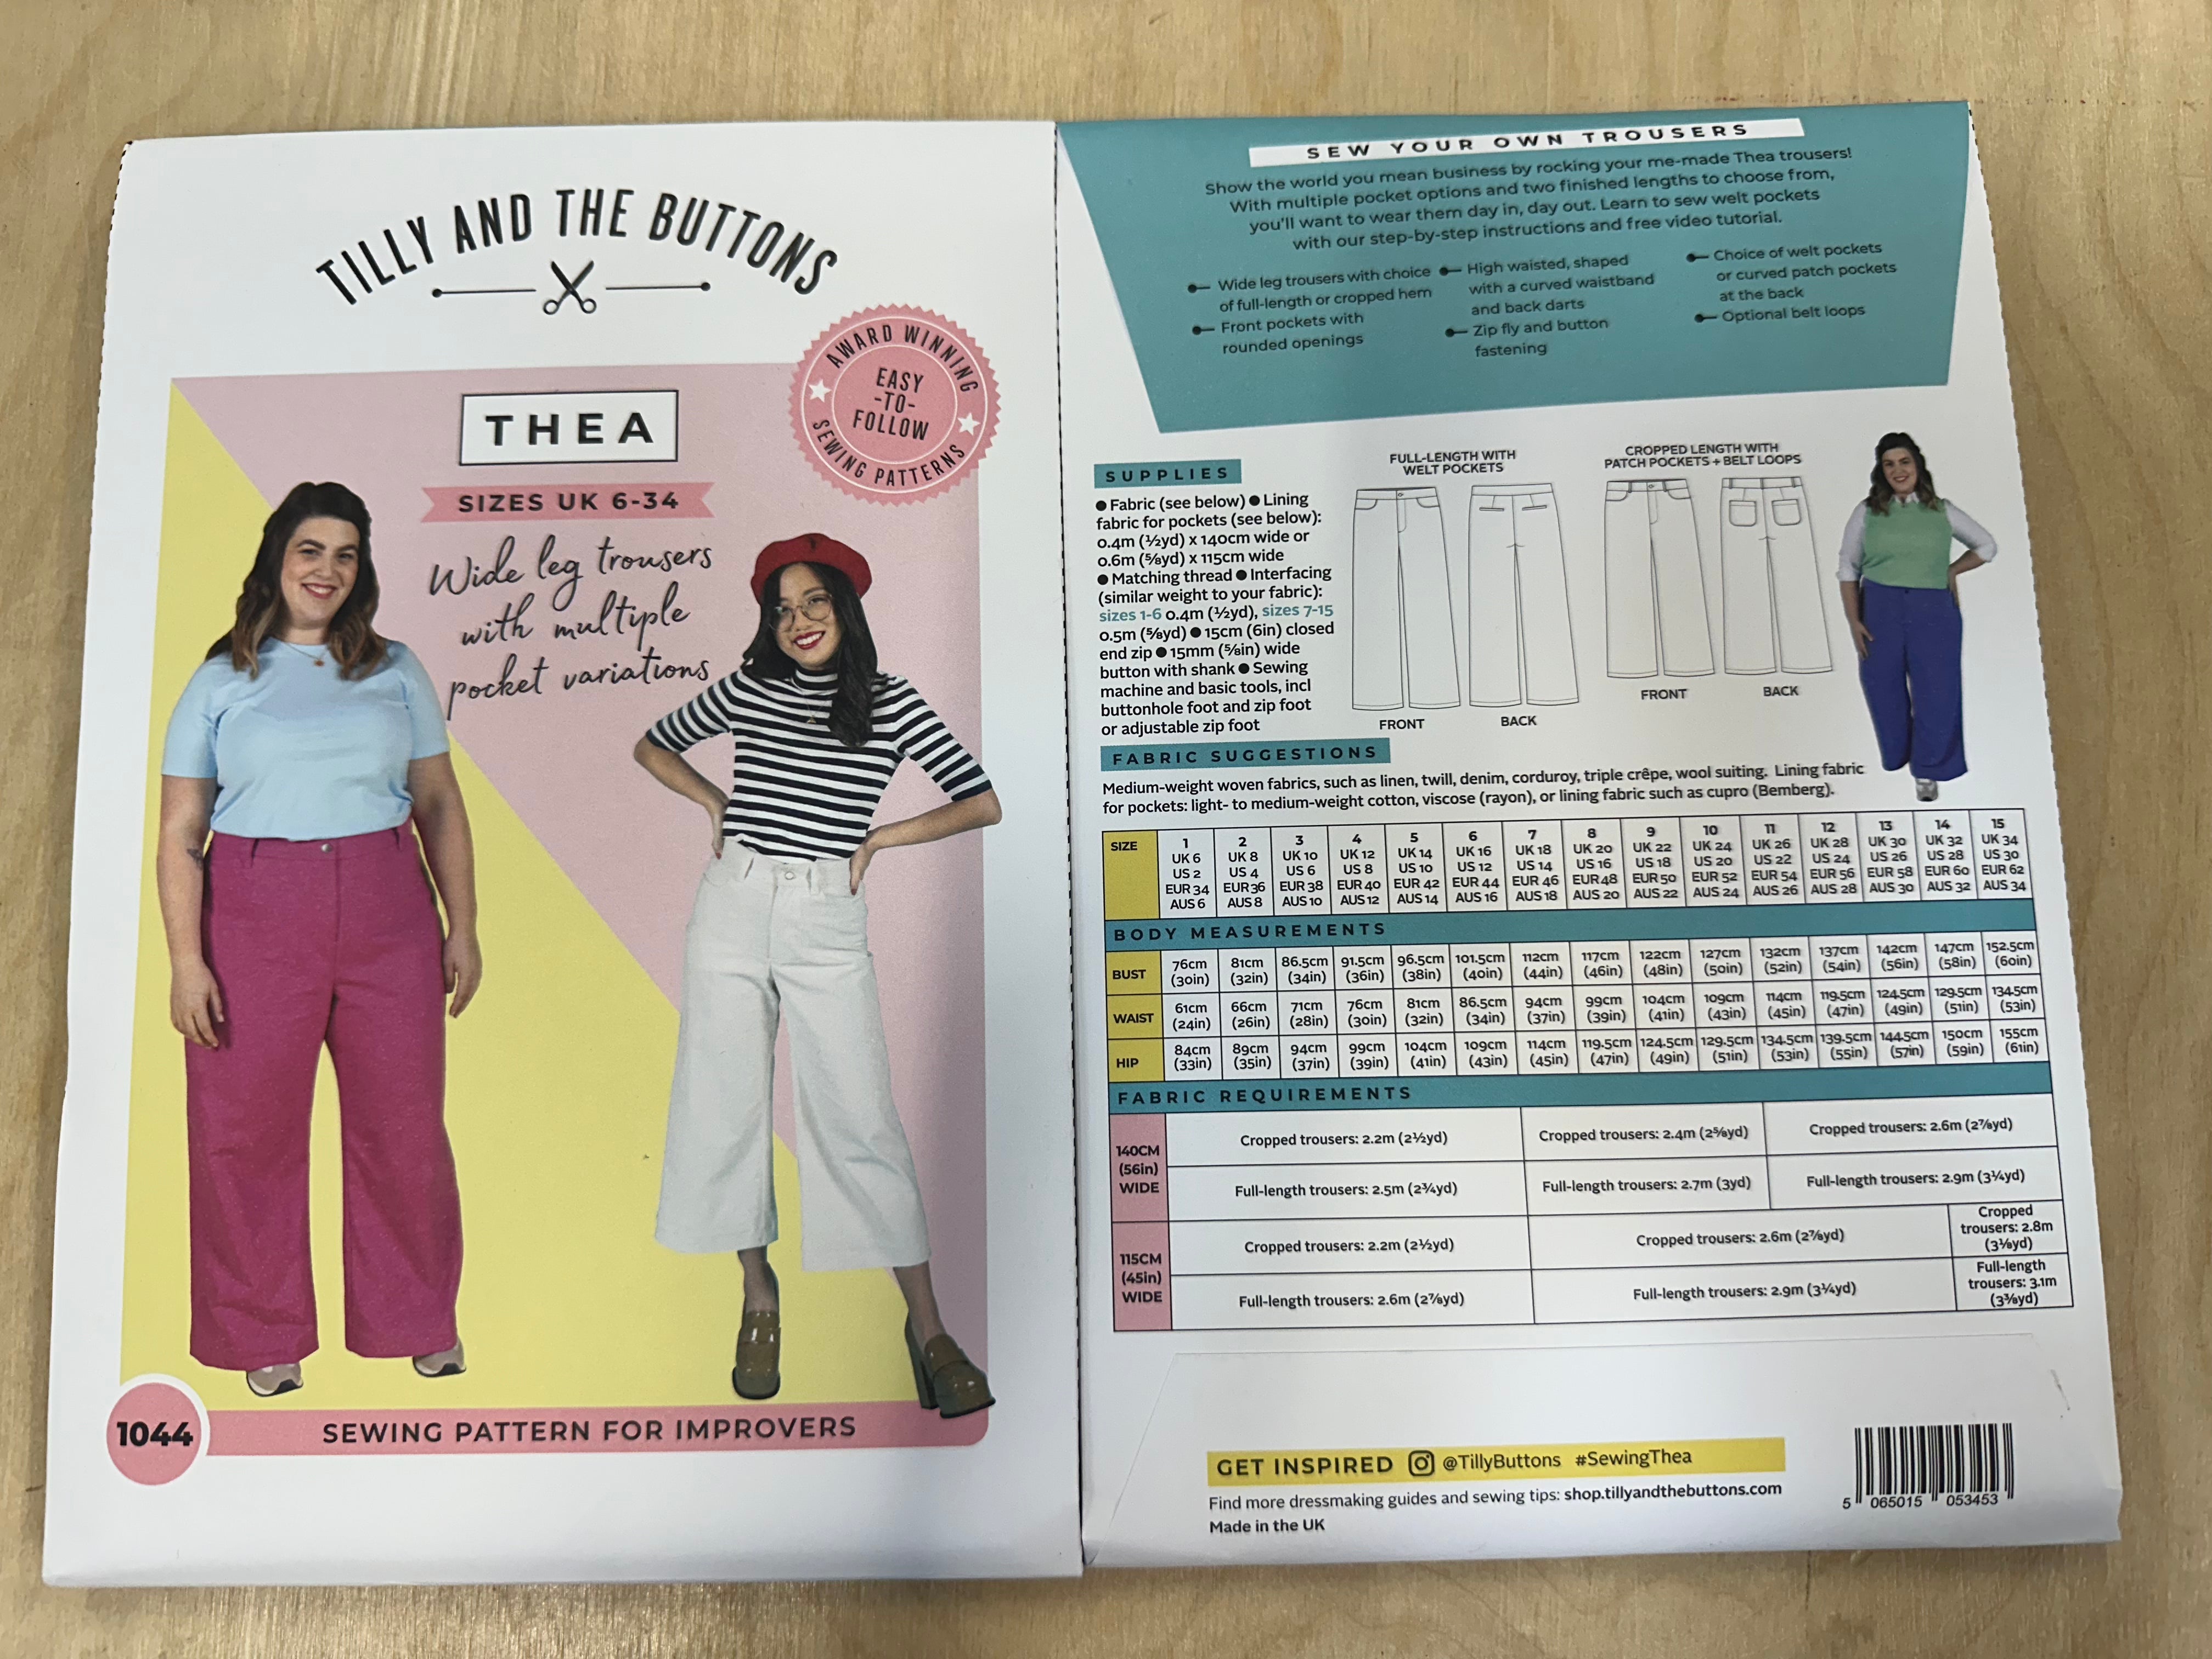 Tilly & The Buttons Thea Sewing Pattern